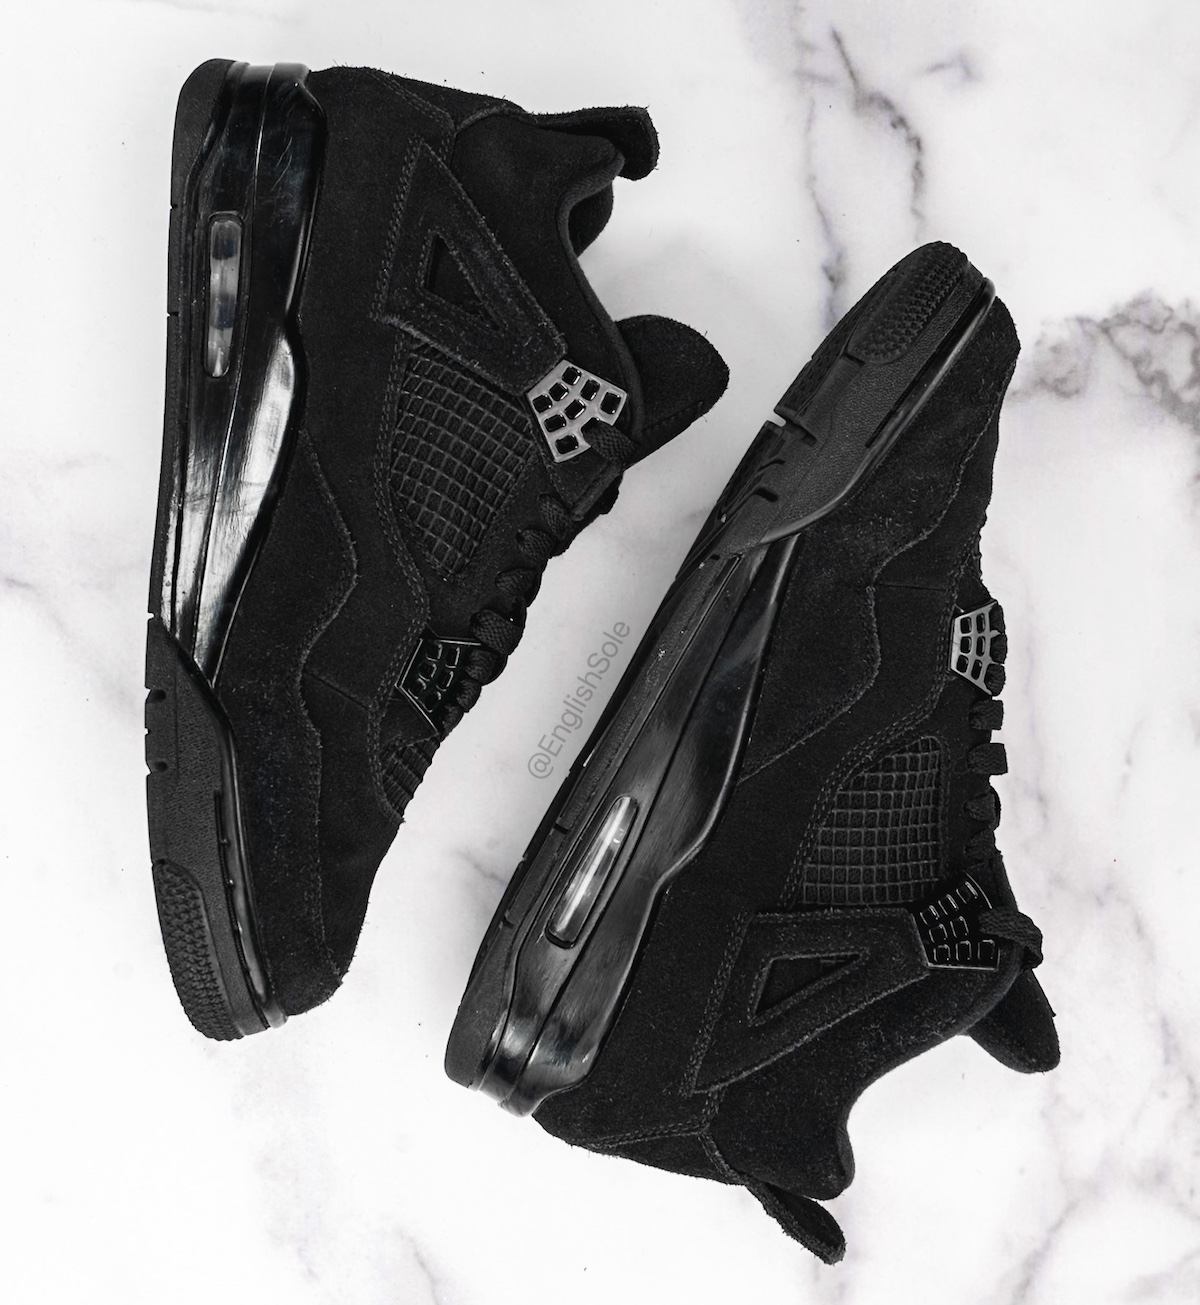 Air Jordan 4 SB Black Cat – Air Jordan 4 SB Black Cat – first retirement